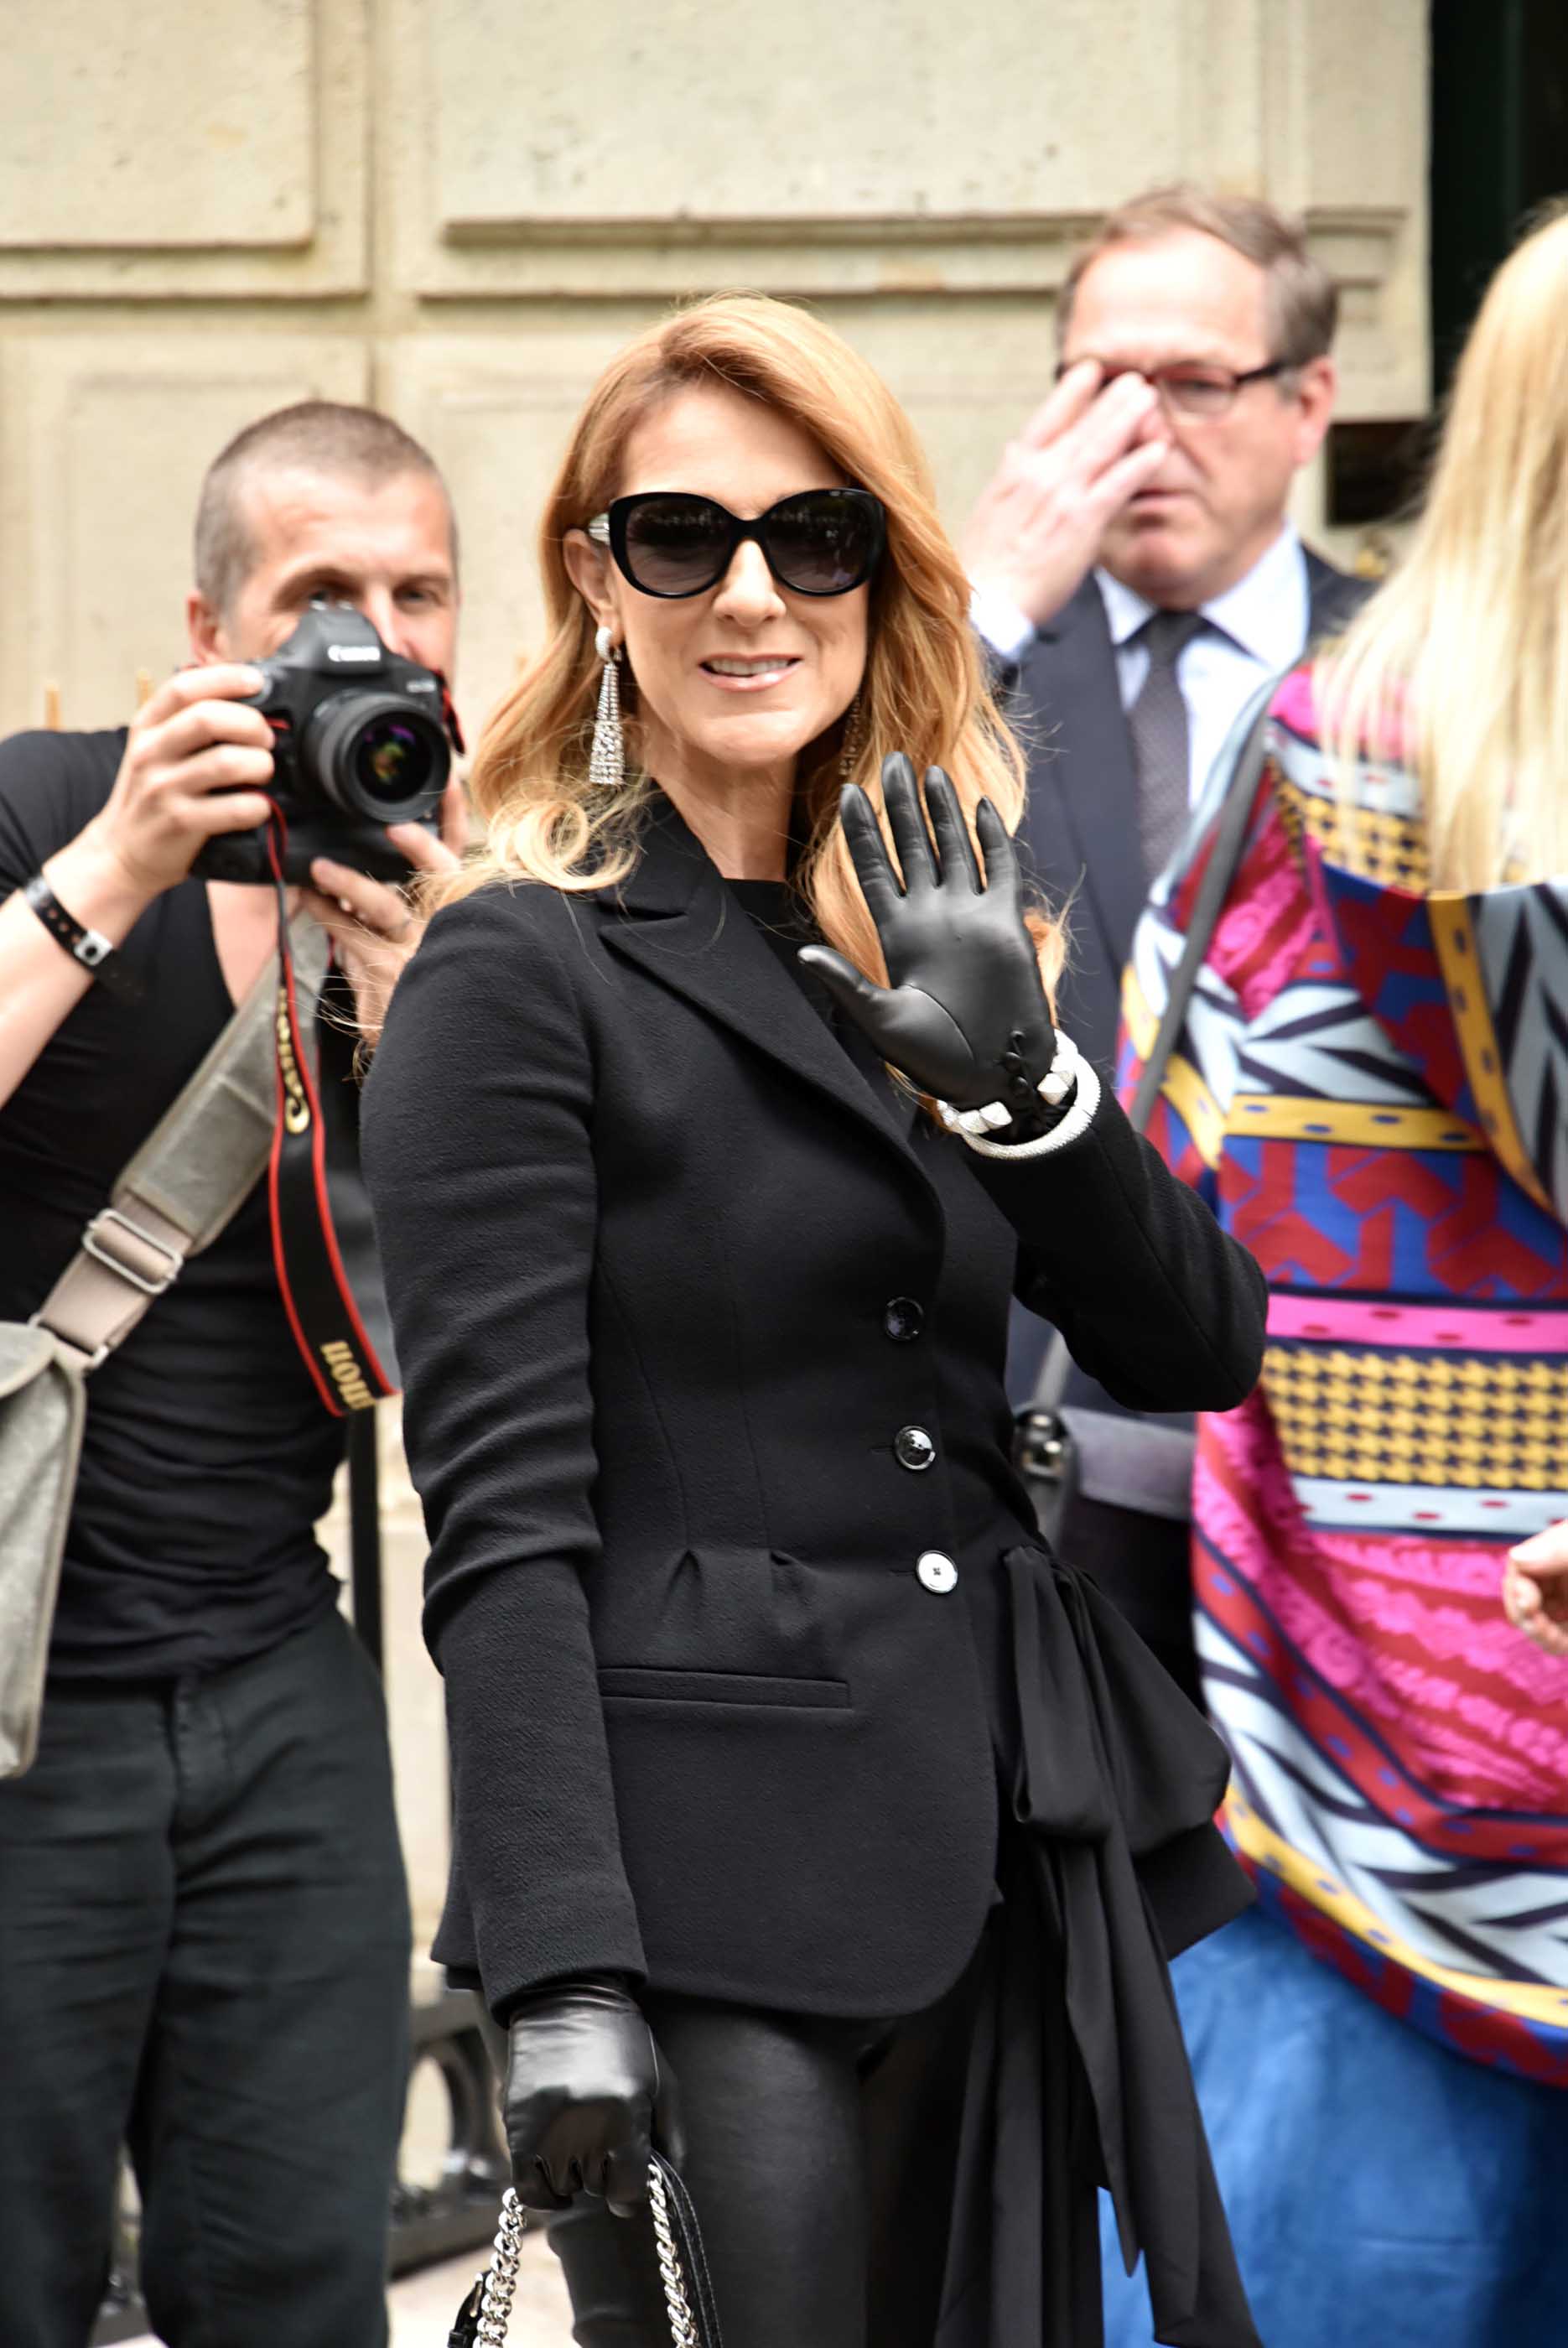 Celine Dion attends the Christian Dior Haute Couture Fall/Winter 2016/2017 show